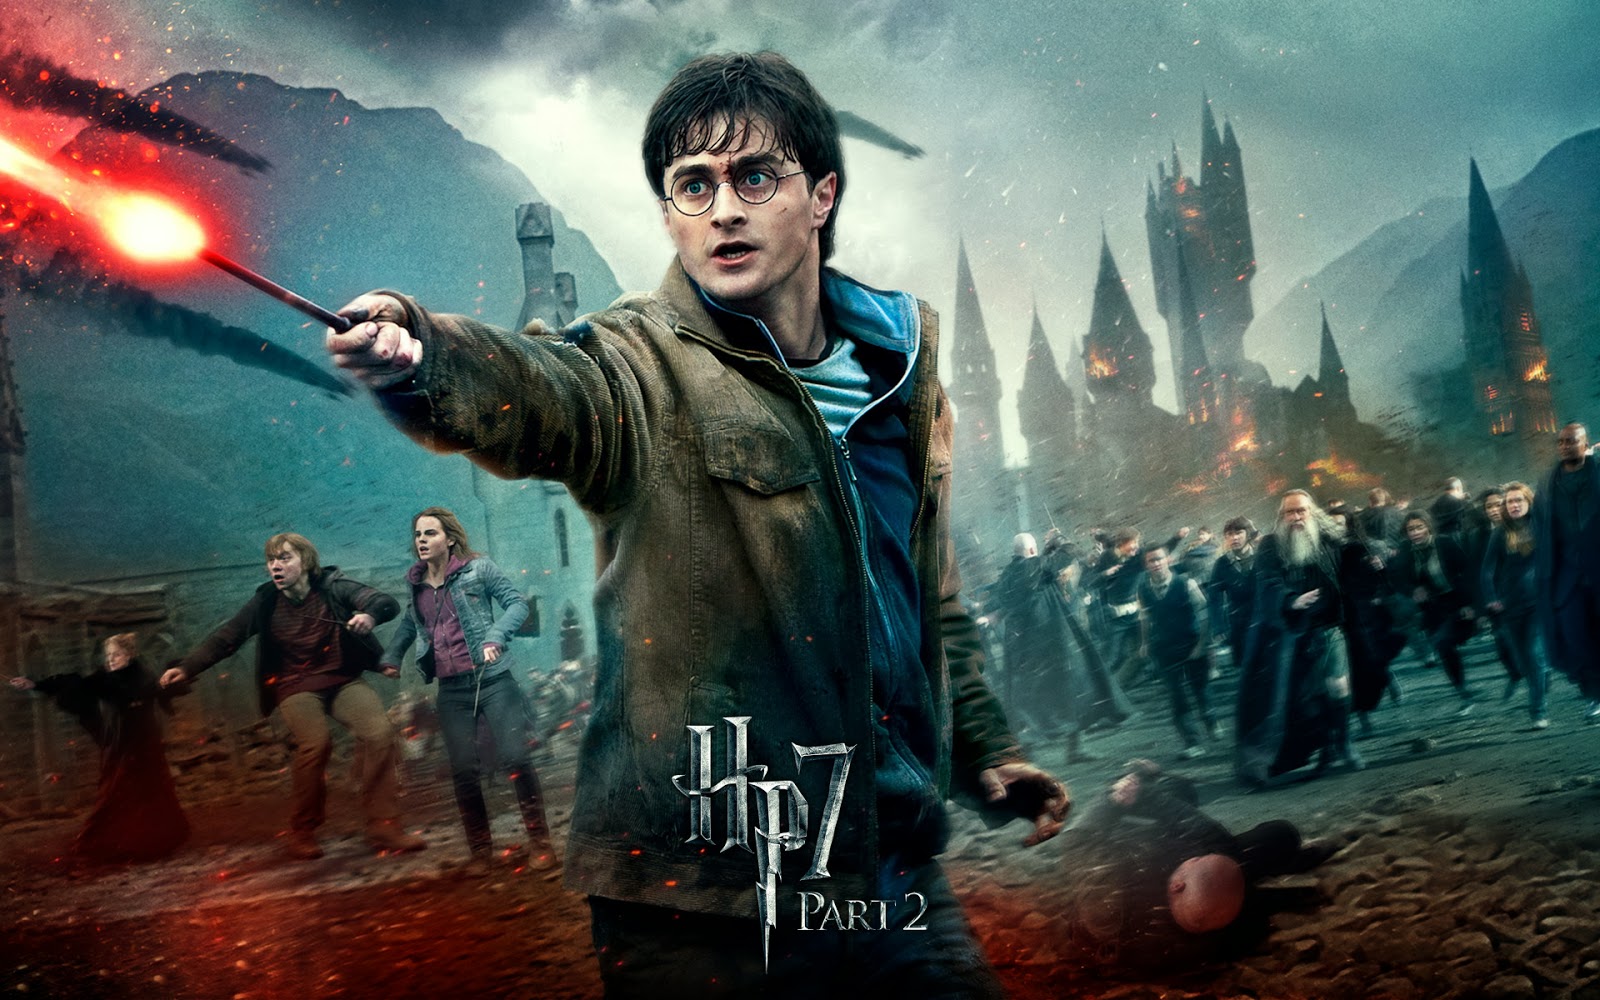 harry potter deathly hallows part 2 game